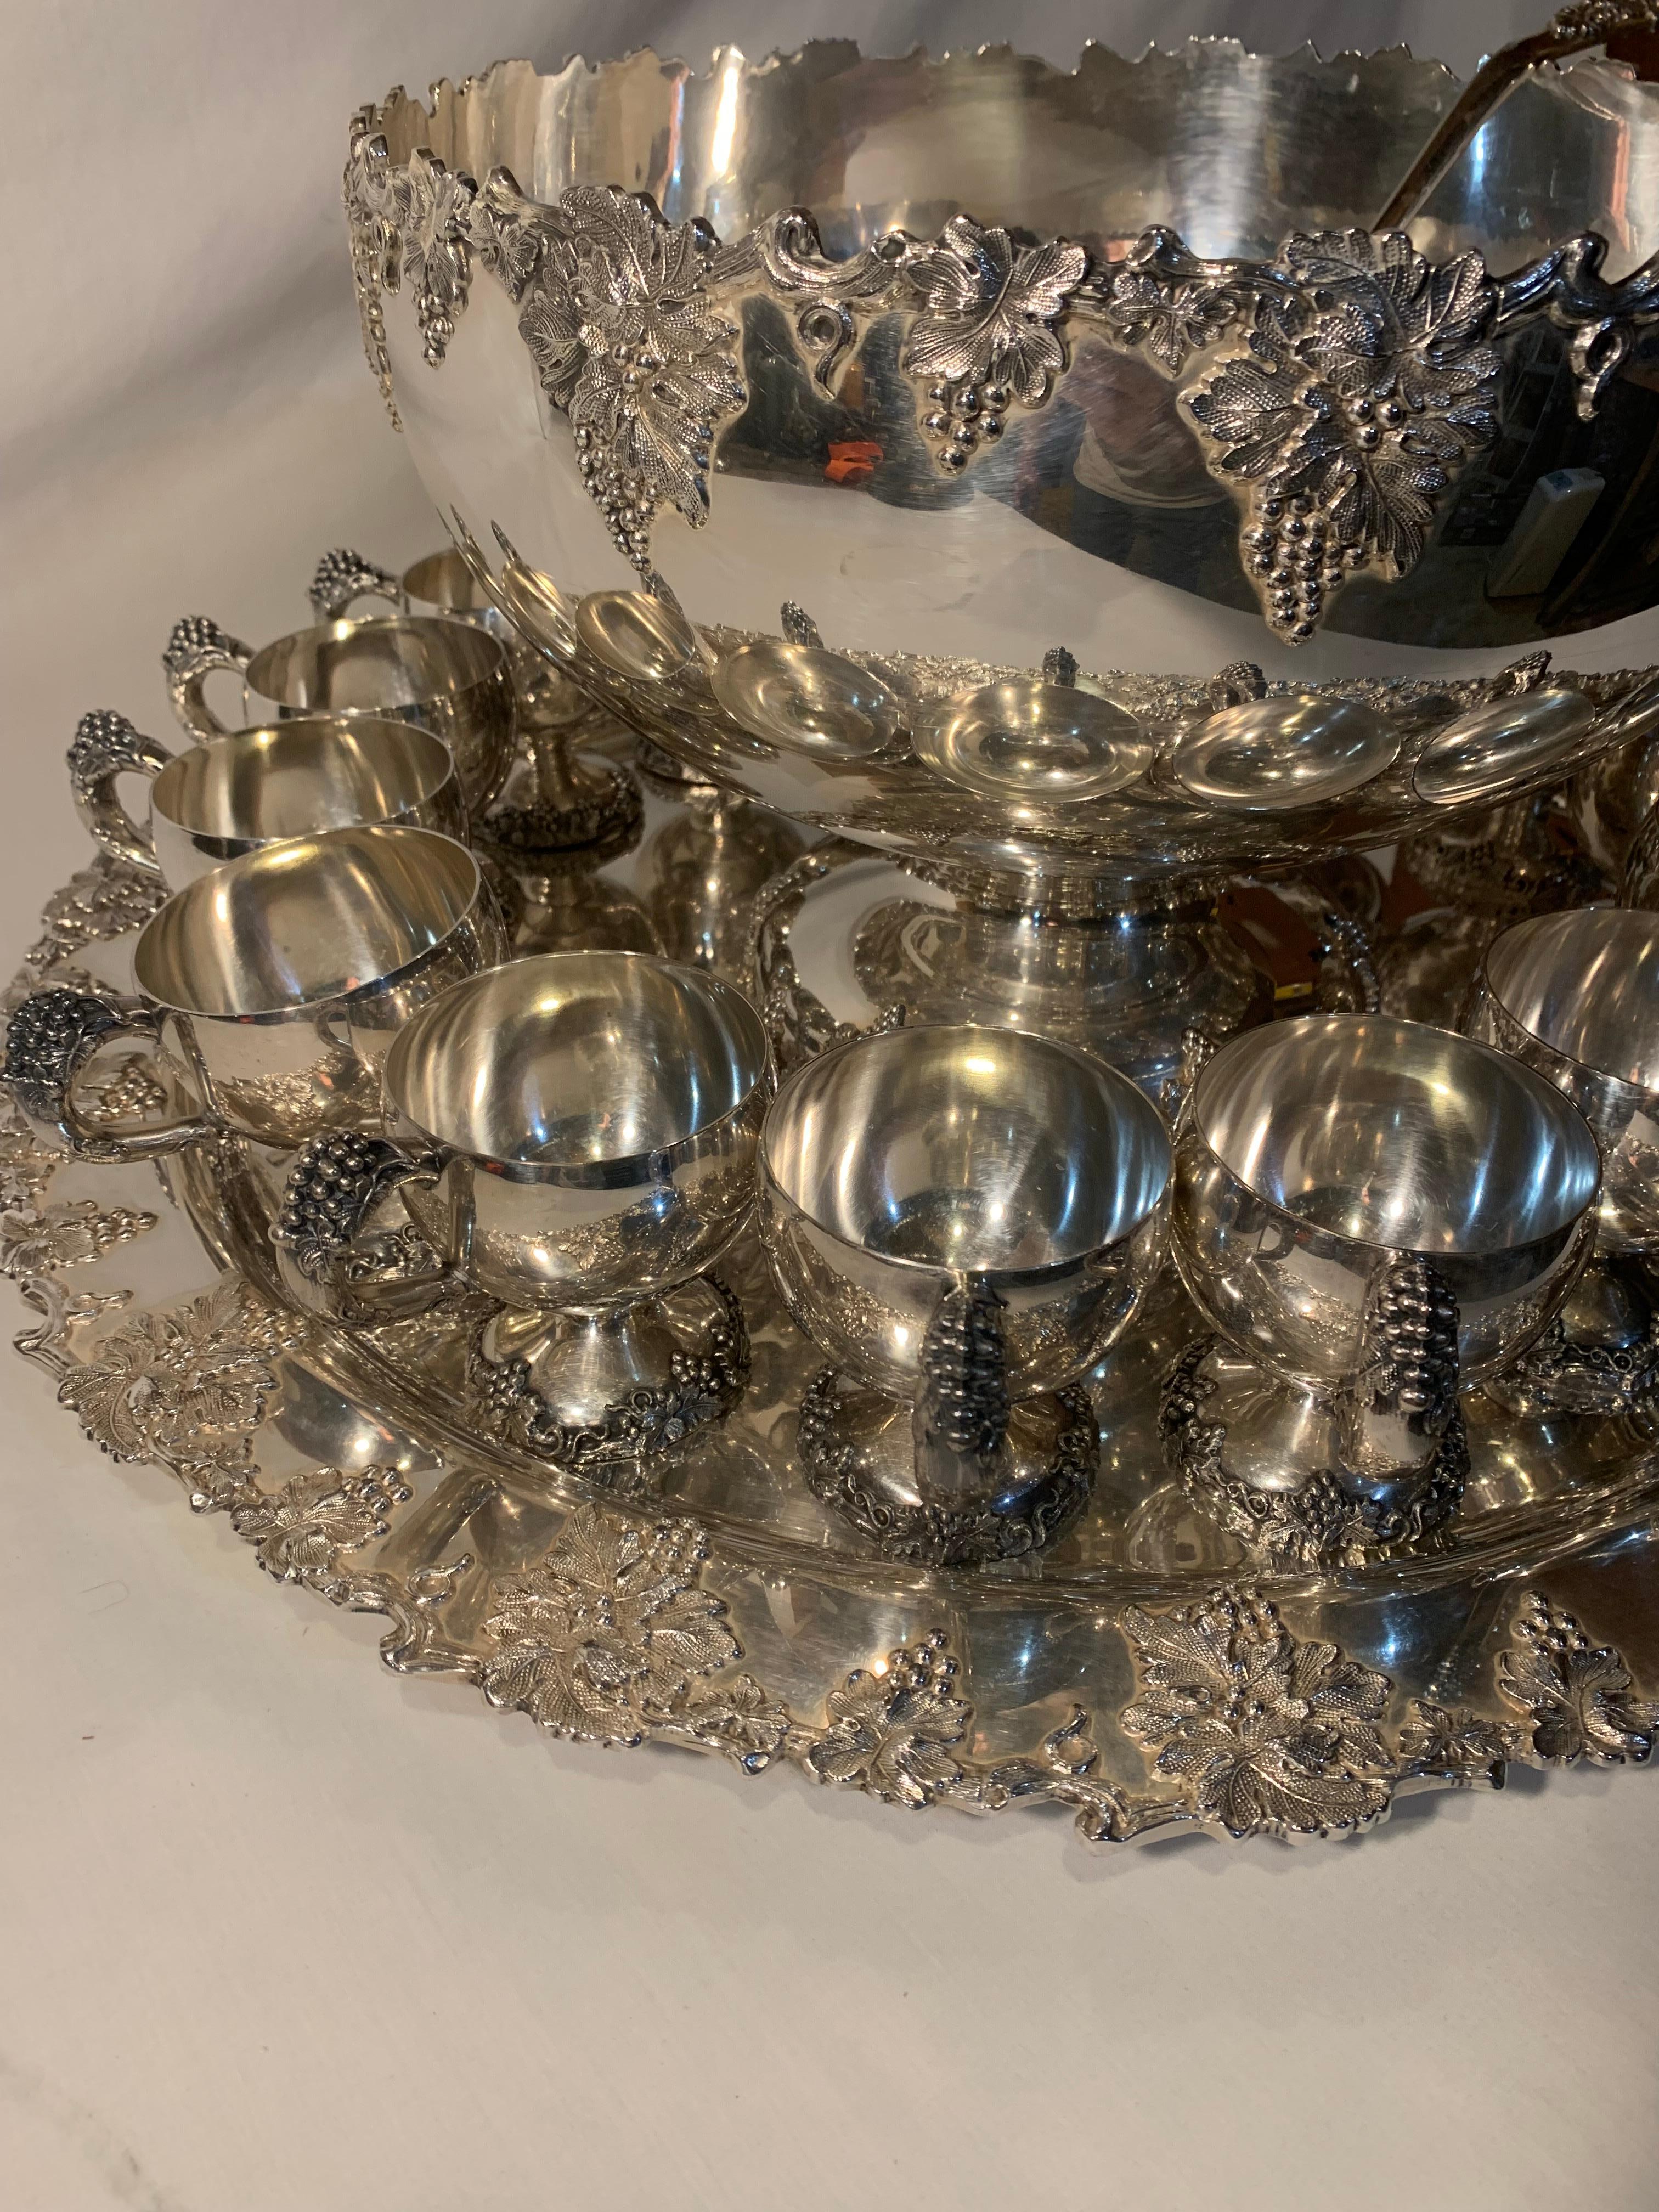 International silver plate Vintage grape punch bowl set with platter, 16 cups & ladle 

Item description

This auction is for an American silver plated punch bowl, platter, cups & ladle by International Silver in the Vintage pattern, grape